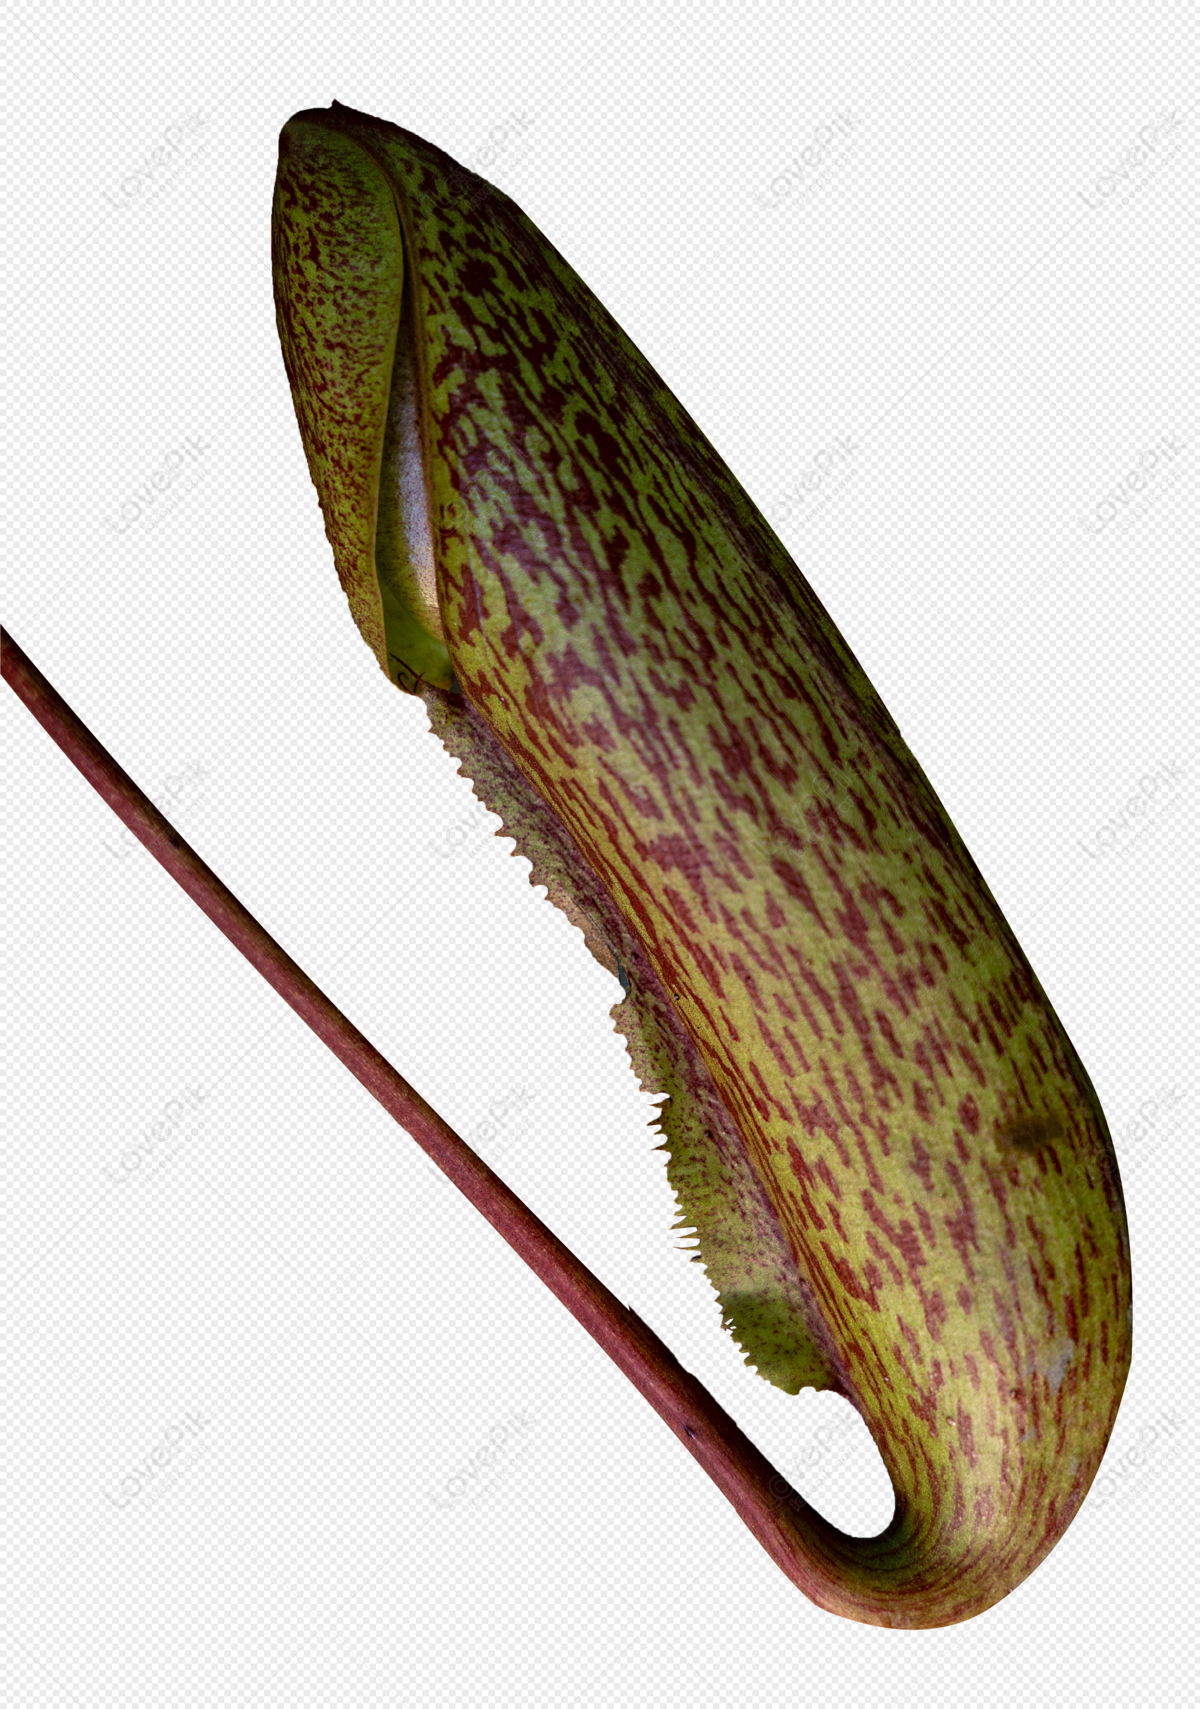 Image of Pinguicula vulgaris, the Common butterwort, insectivorous plant